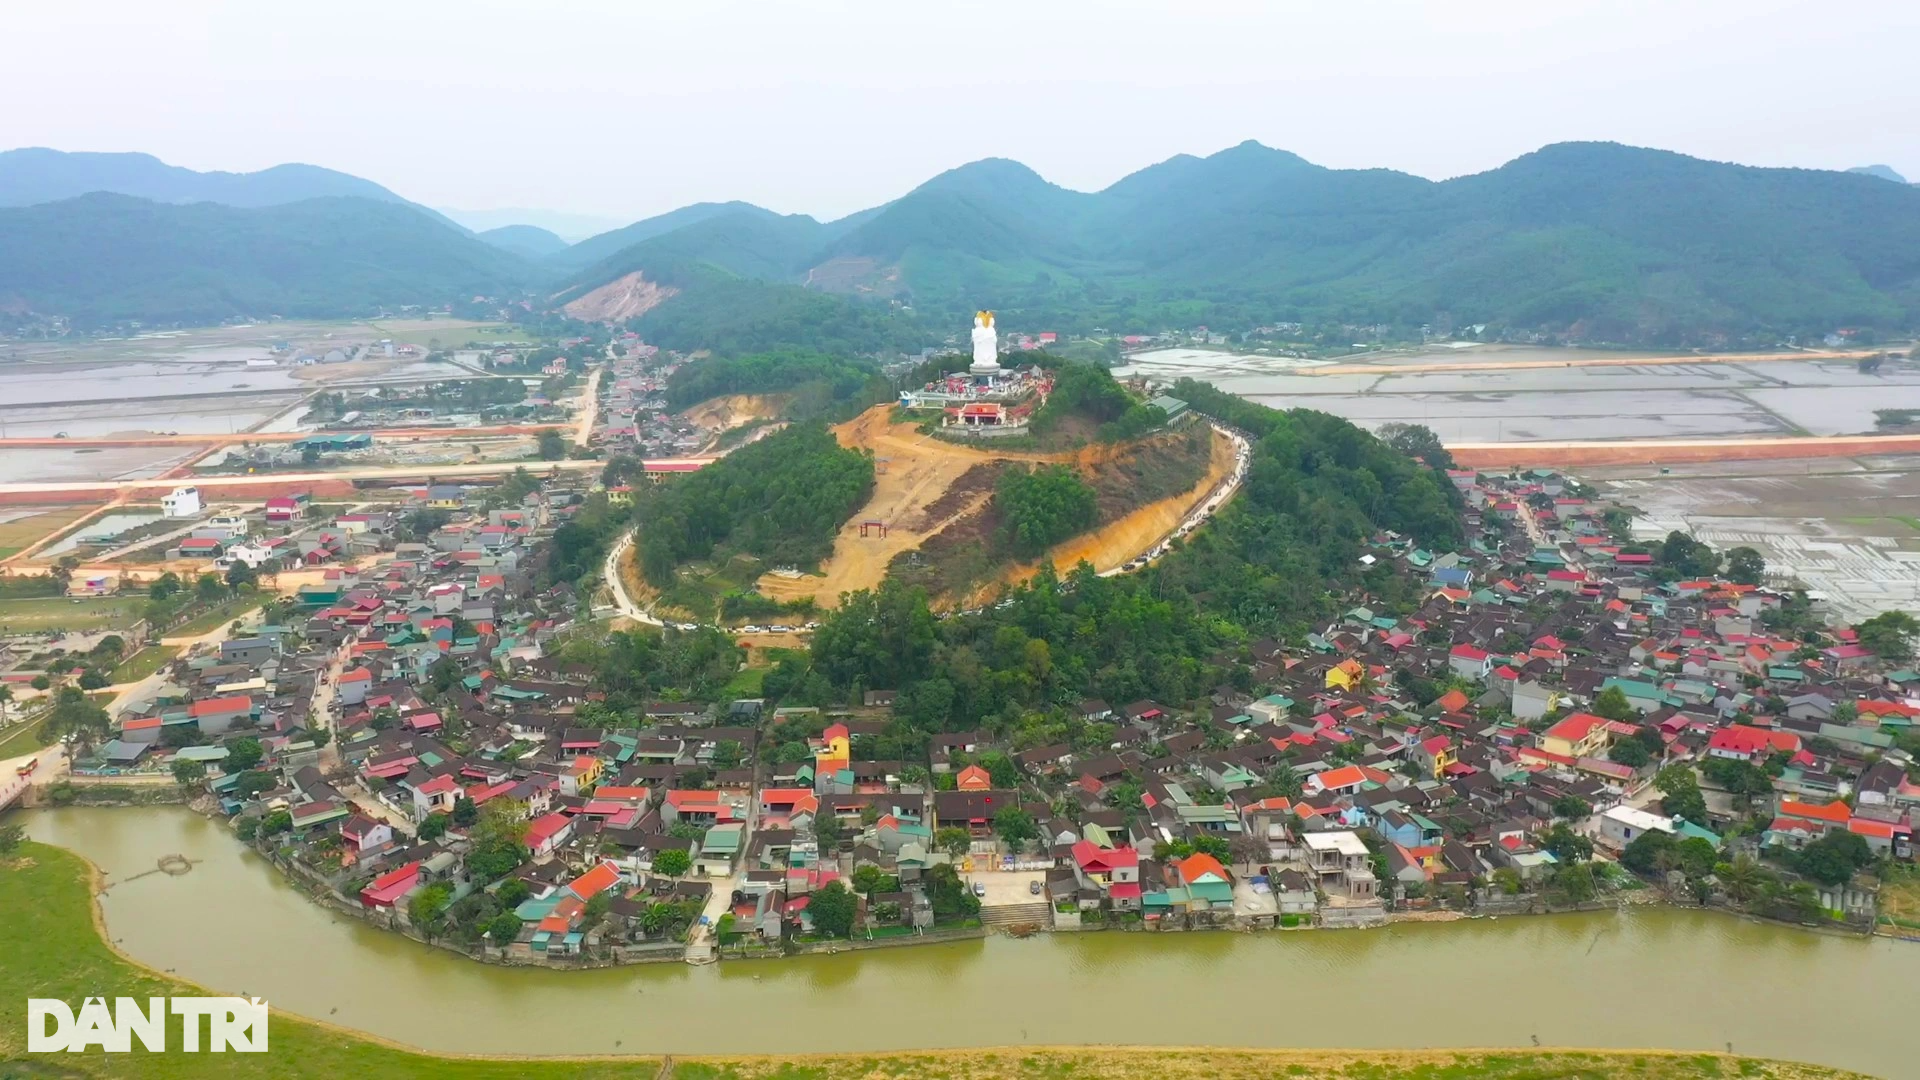 Glass bridge supported by a giant hand, first appeared in Thanh Hoa - 1